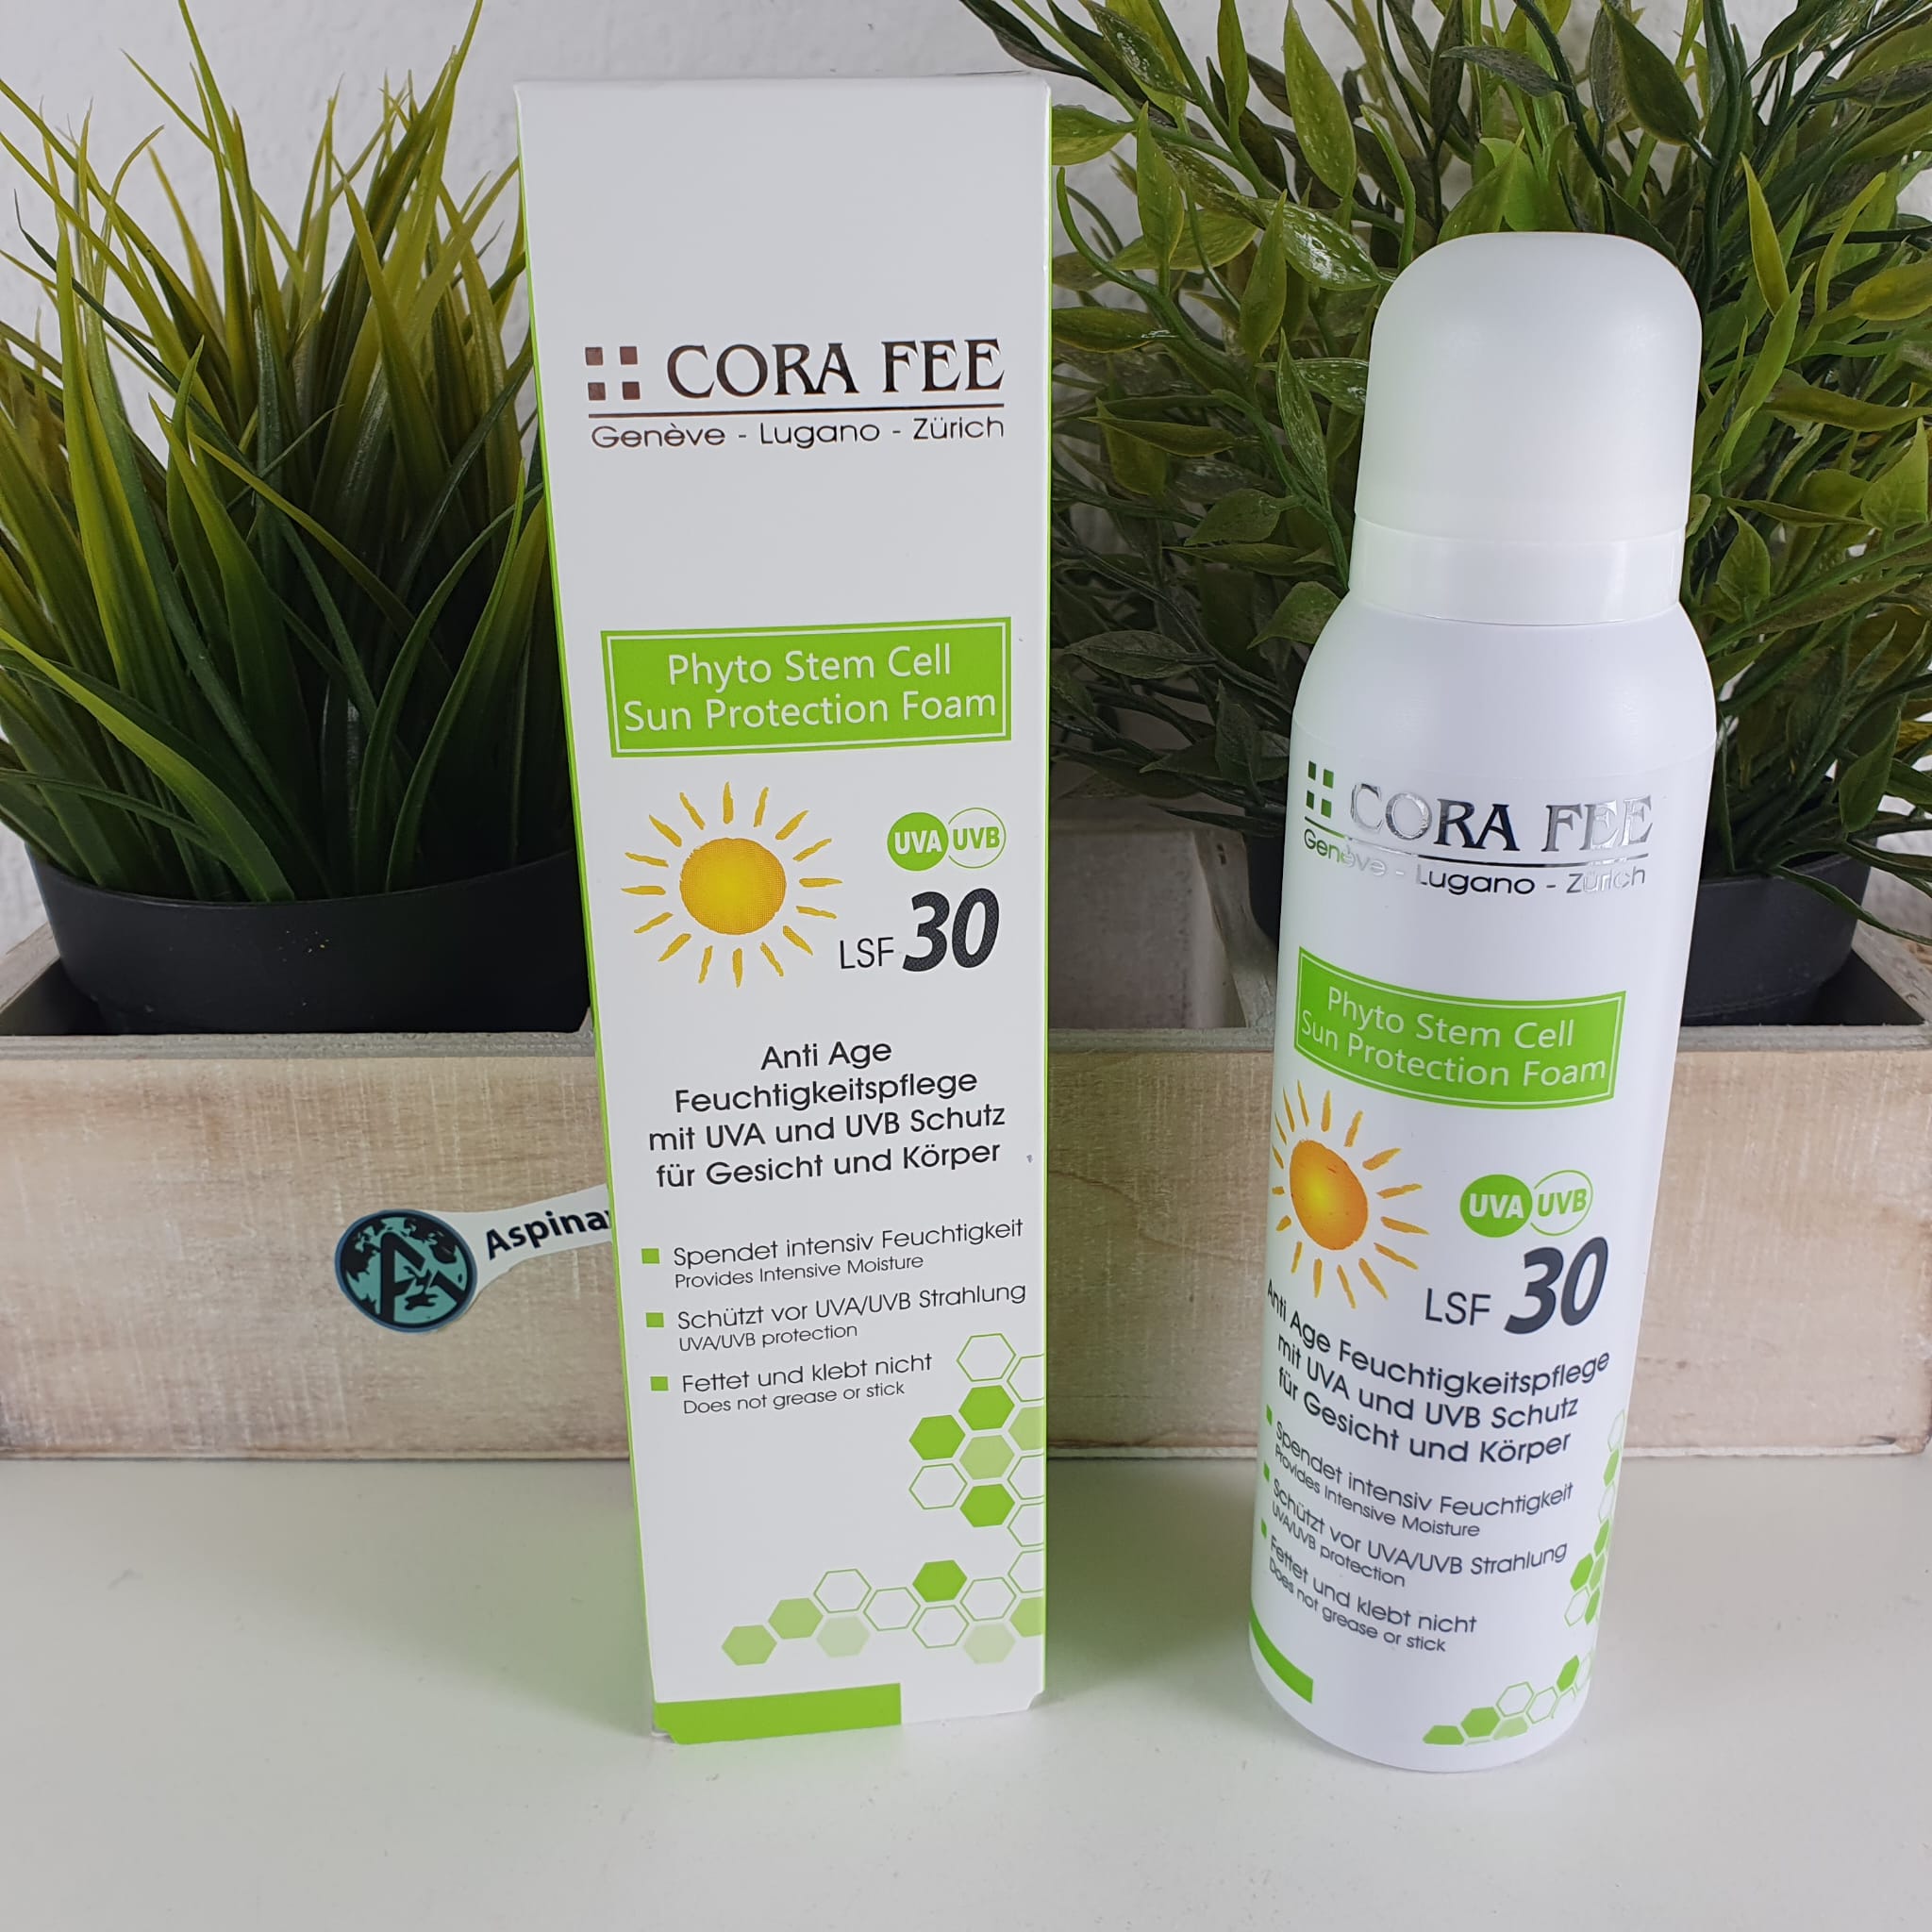 Cora Fee Phyto Stem Cell Sun Protection Foam LSF 30